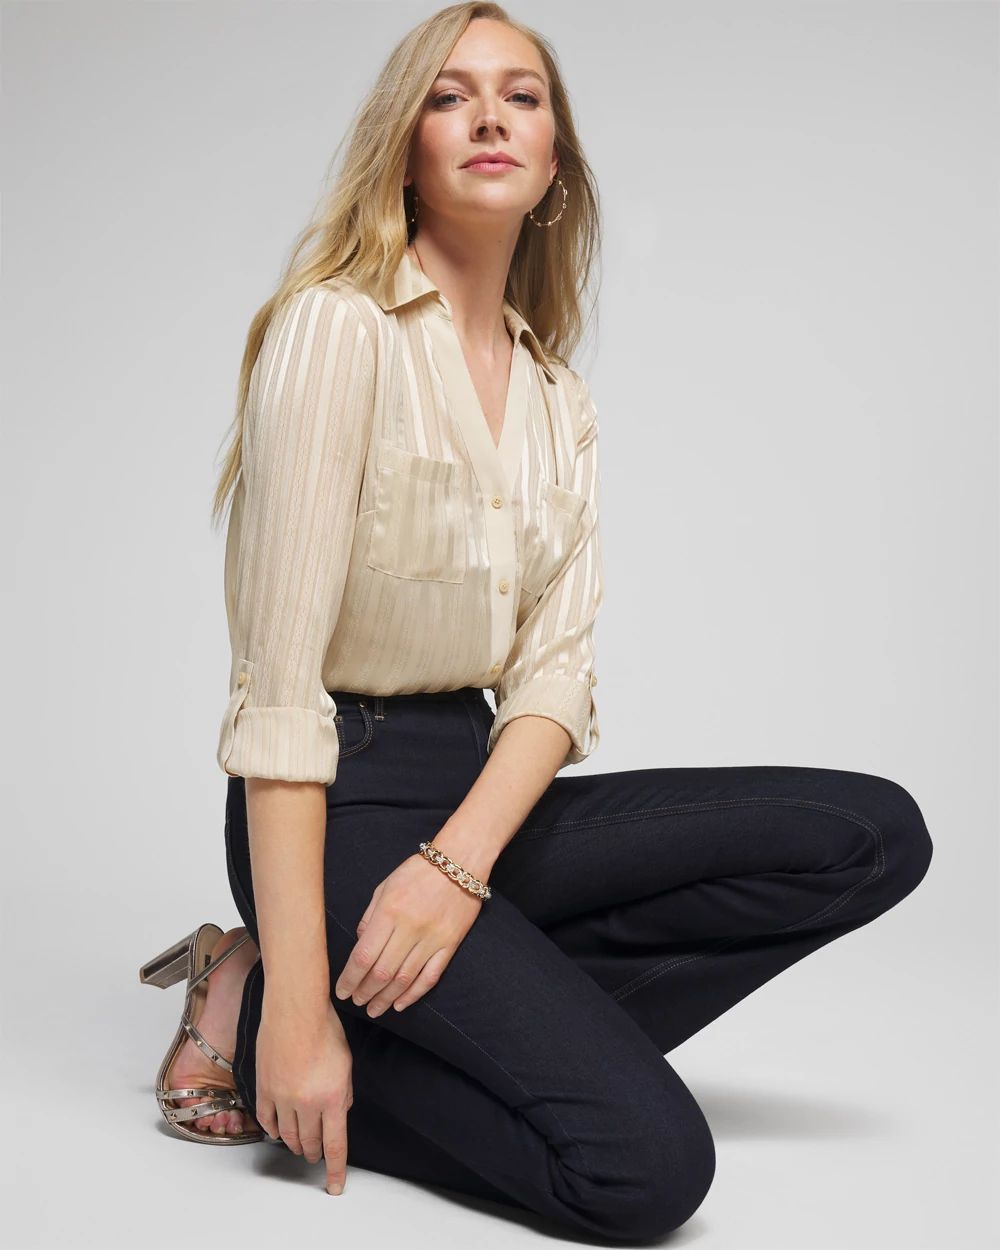 Outlet WHBM Shadow Stripe Shirt click to view larger image.